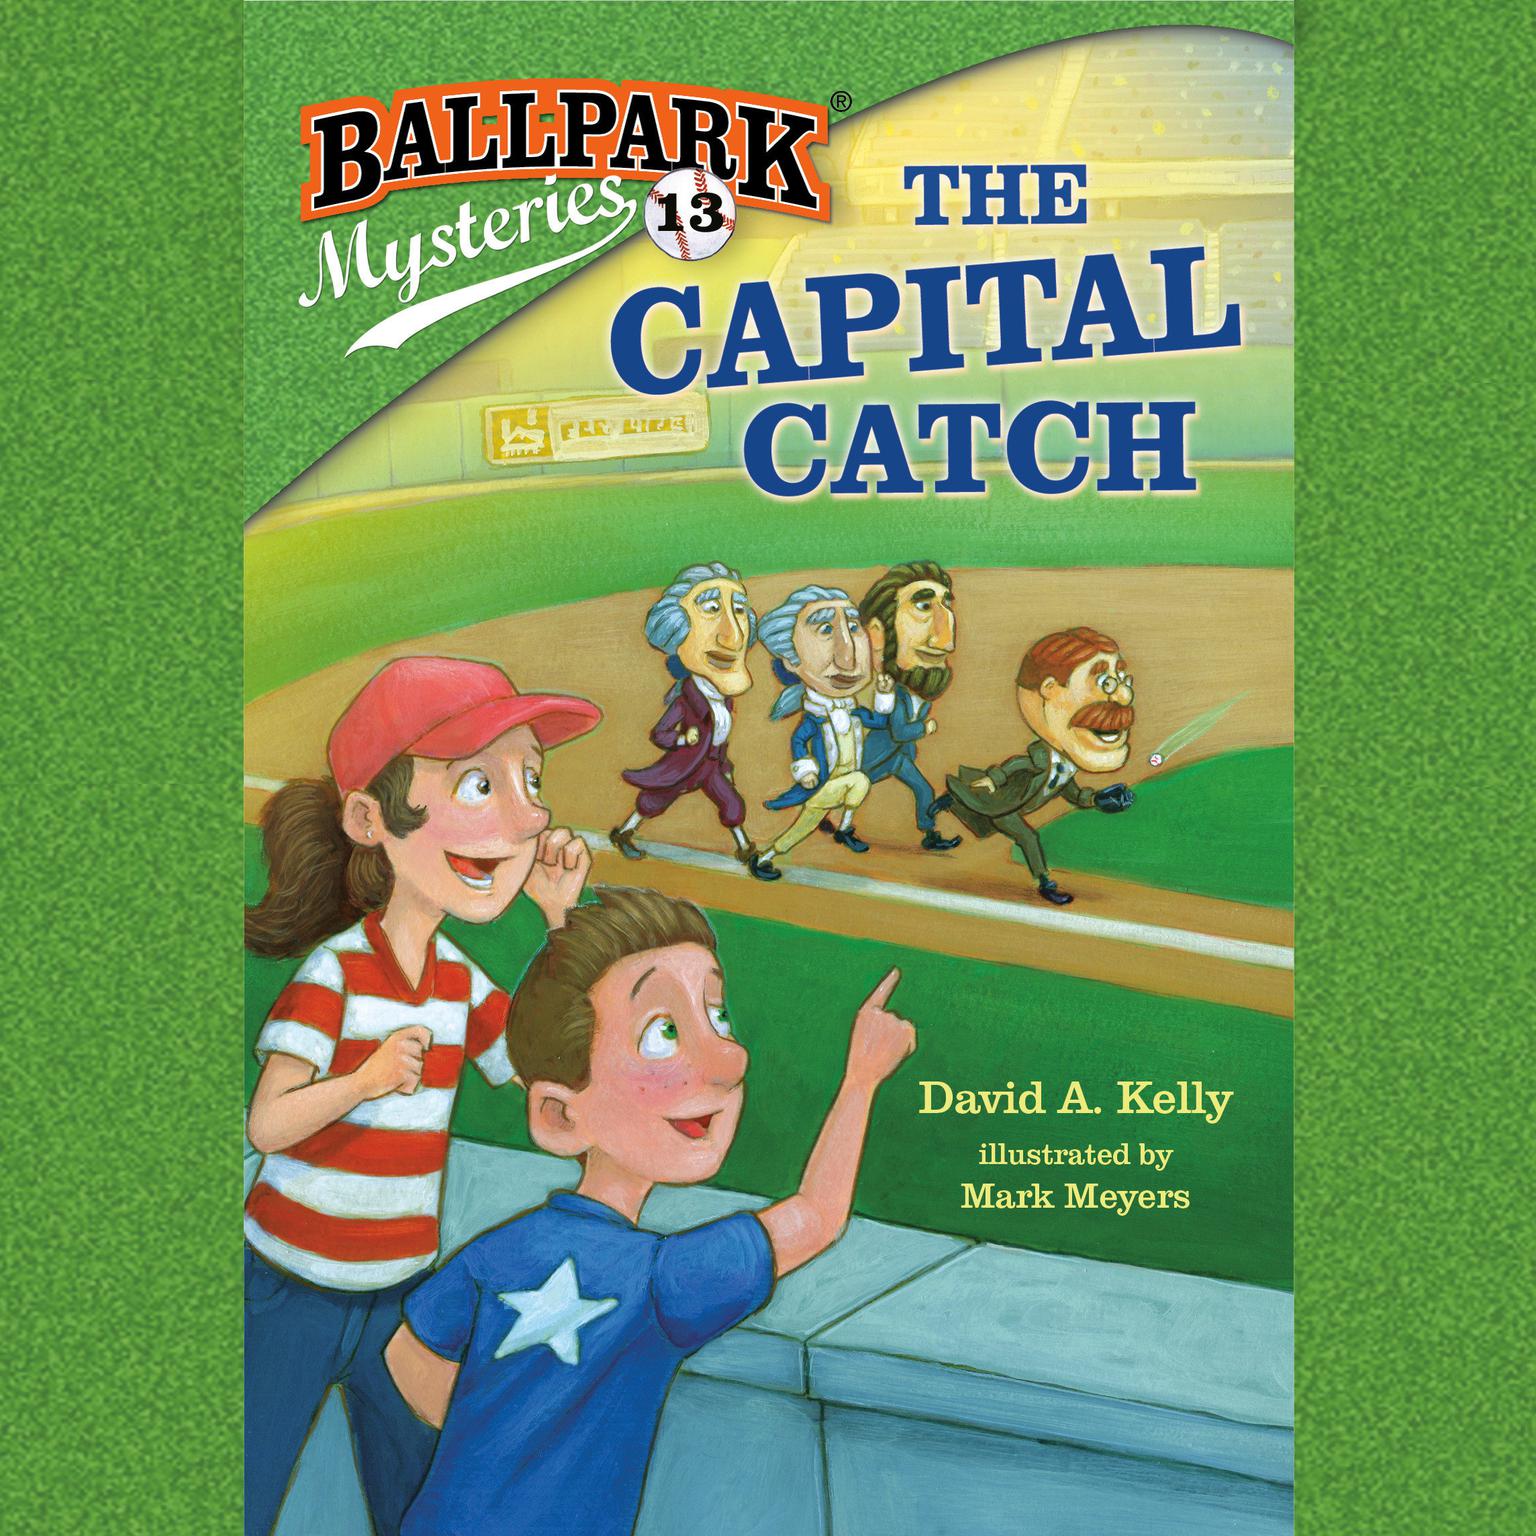 Ballpark Mysteries #13: The Capital Catch Audiobook, by David A. Kelly